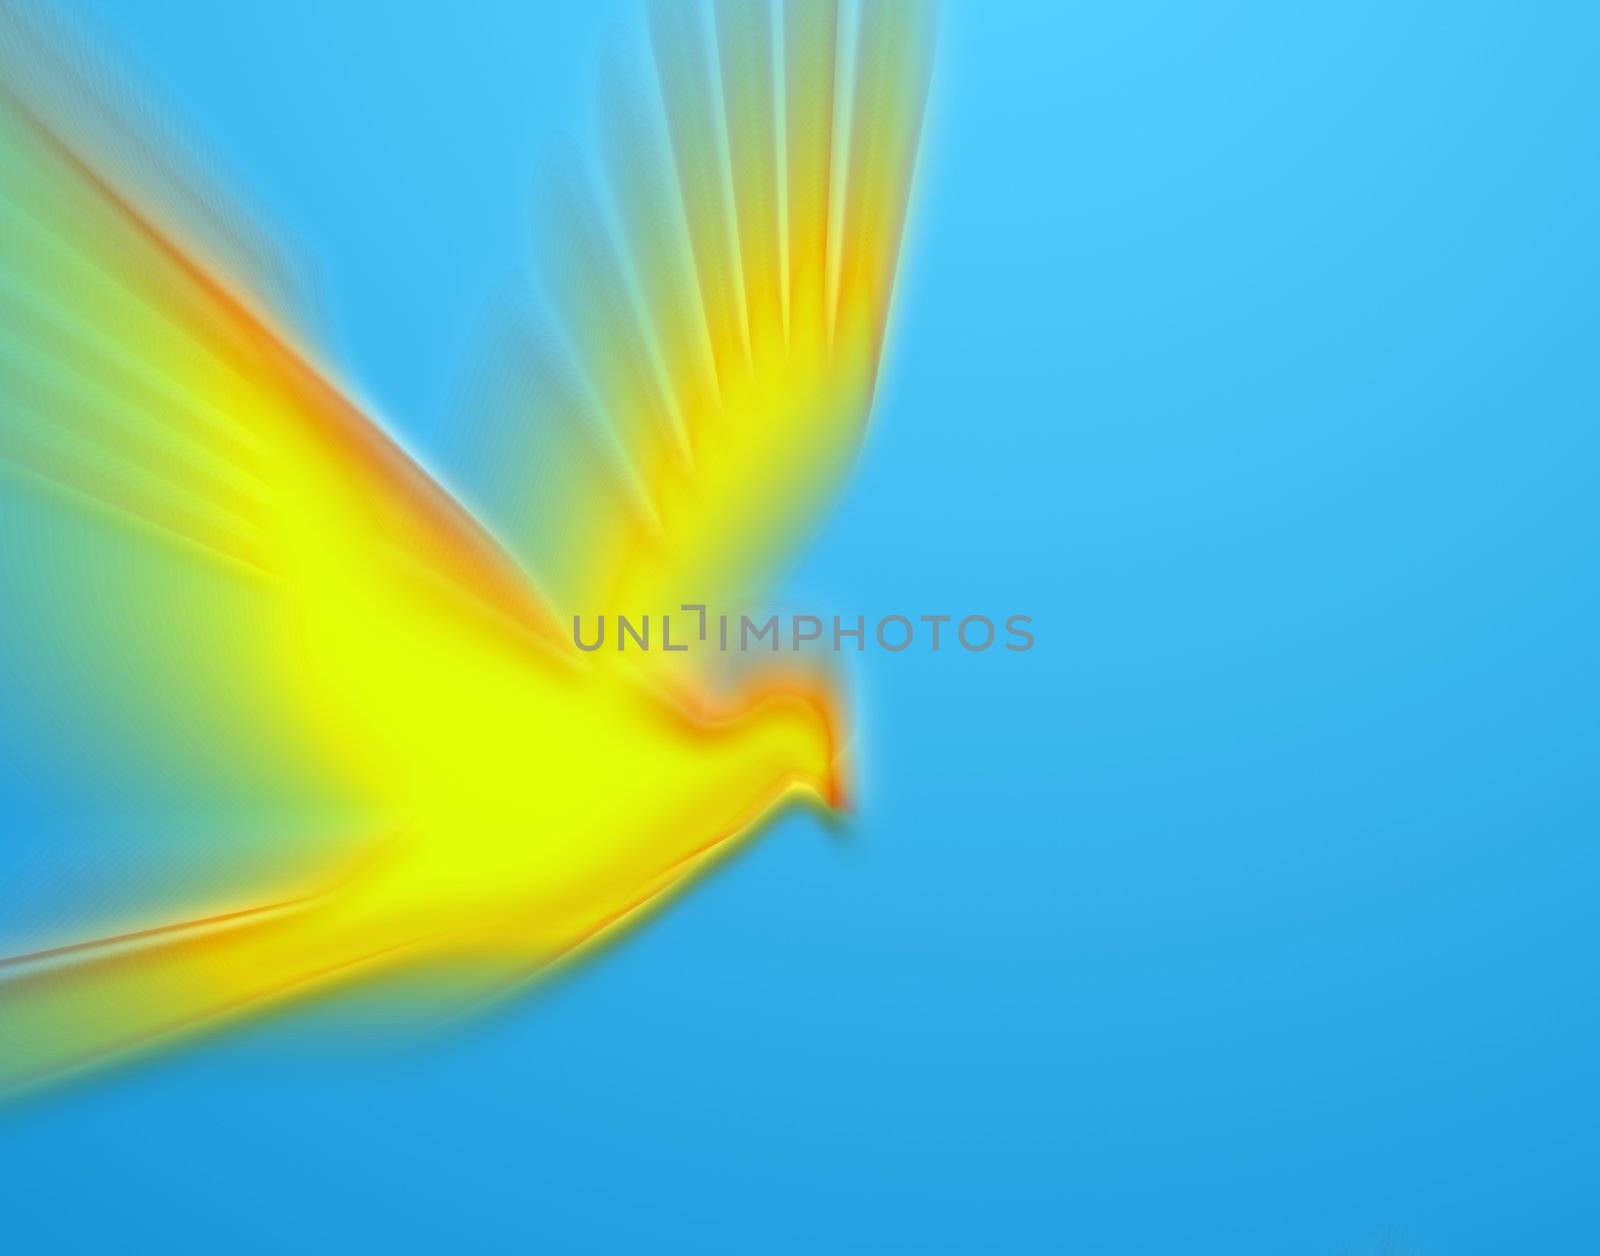 moving bright yellow pigeon on blue background